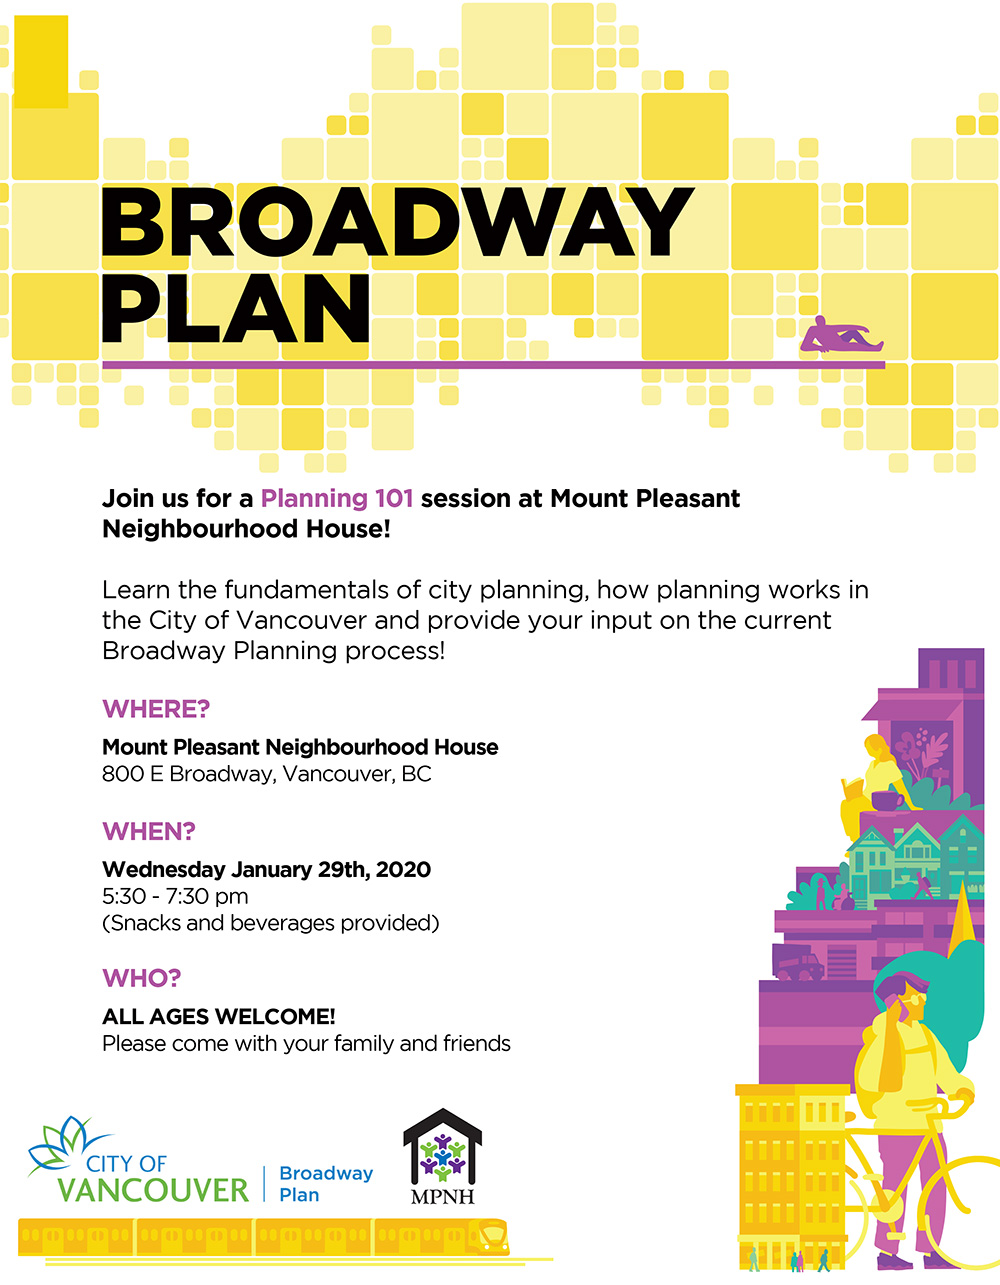 A poster for the Broadway Plan: Planning 101 session showing bright yellow and purple building blocks of community